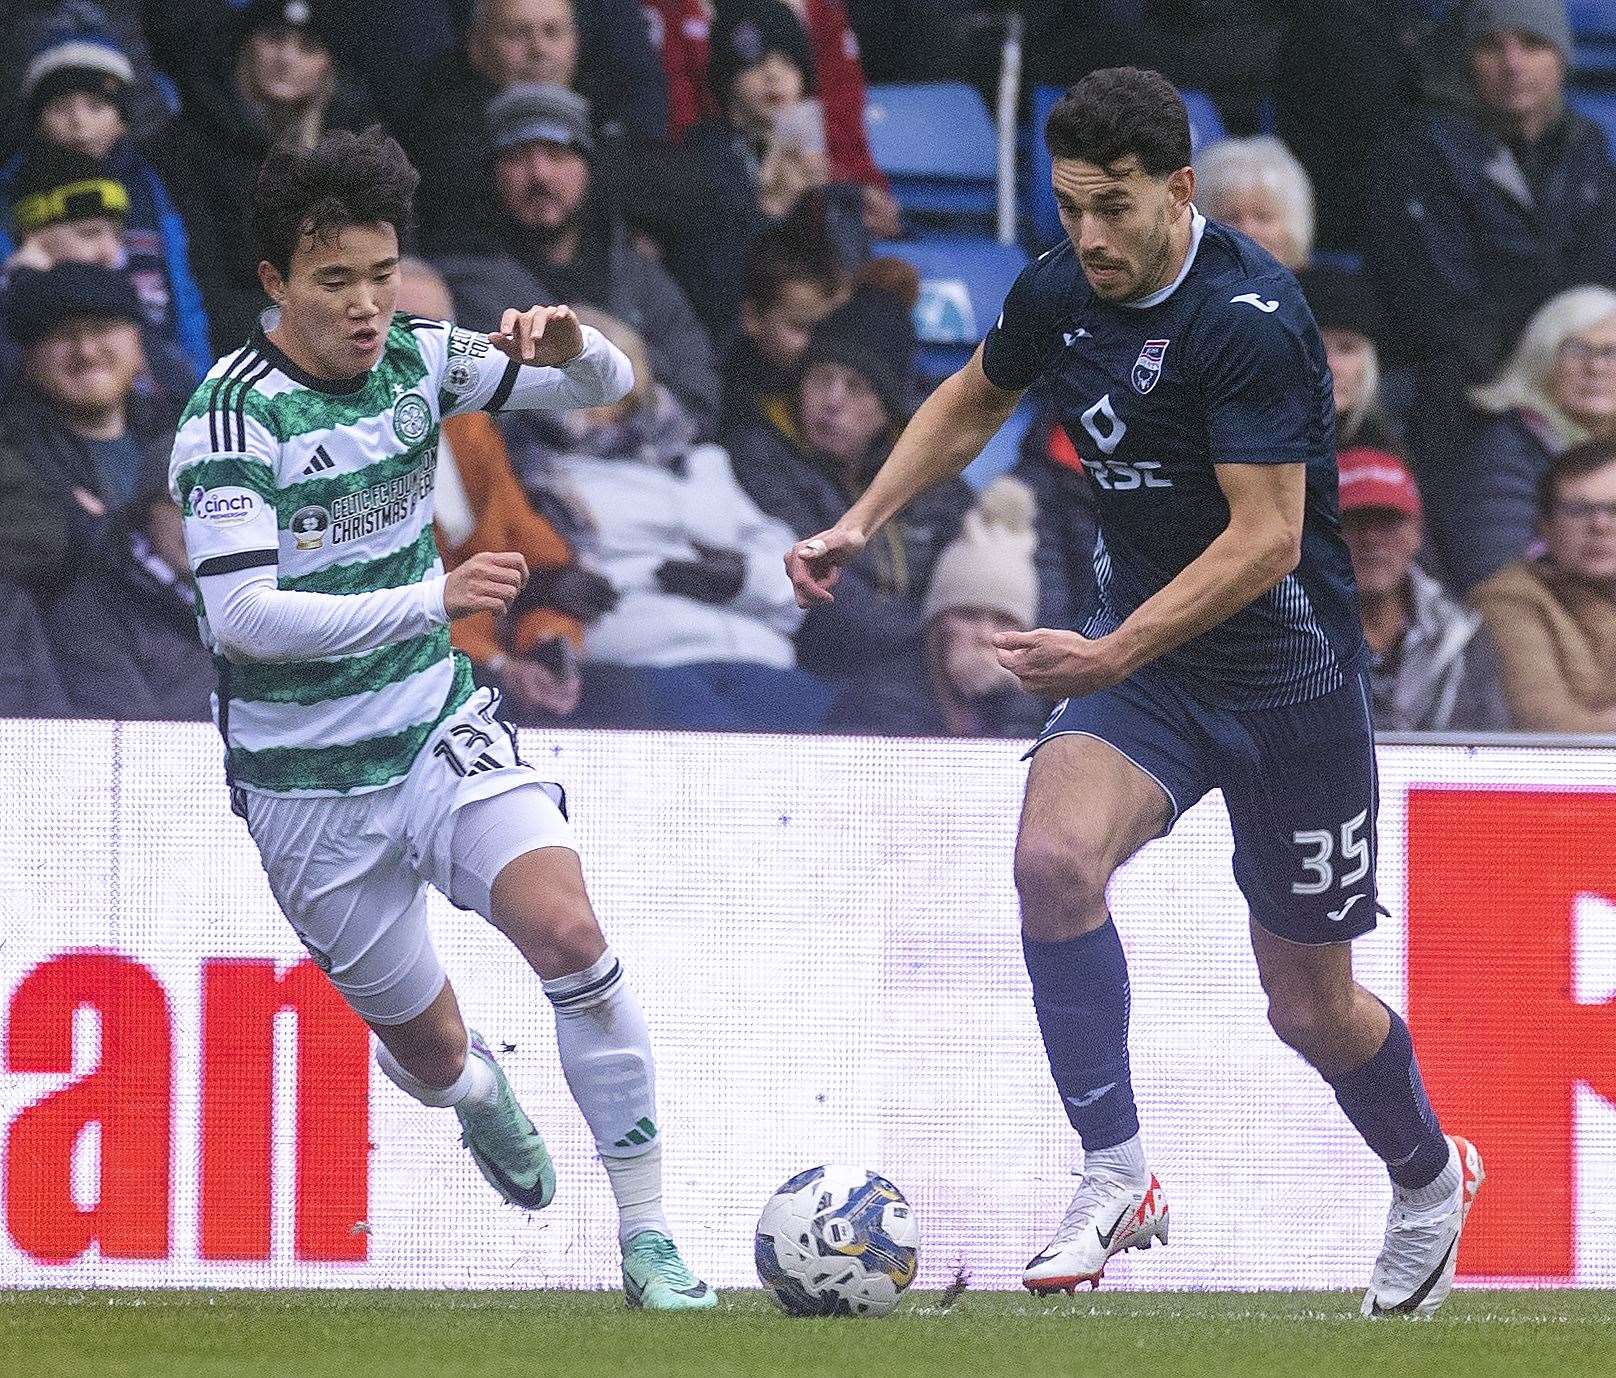 Ross County's Will Nightingale gets away from Celtic’s Yang Hyun-Jun. Picture: Ken Macpherson